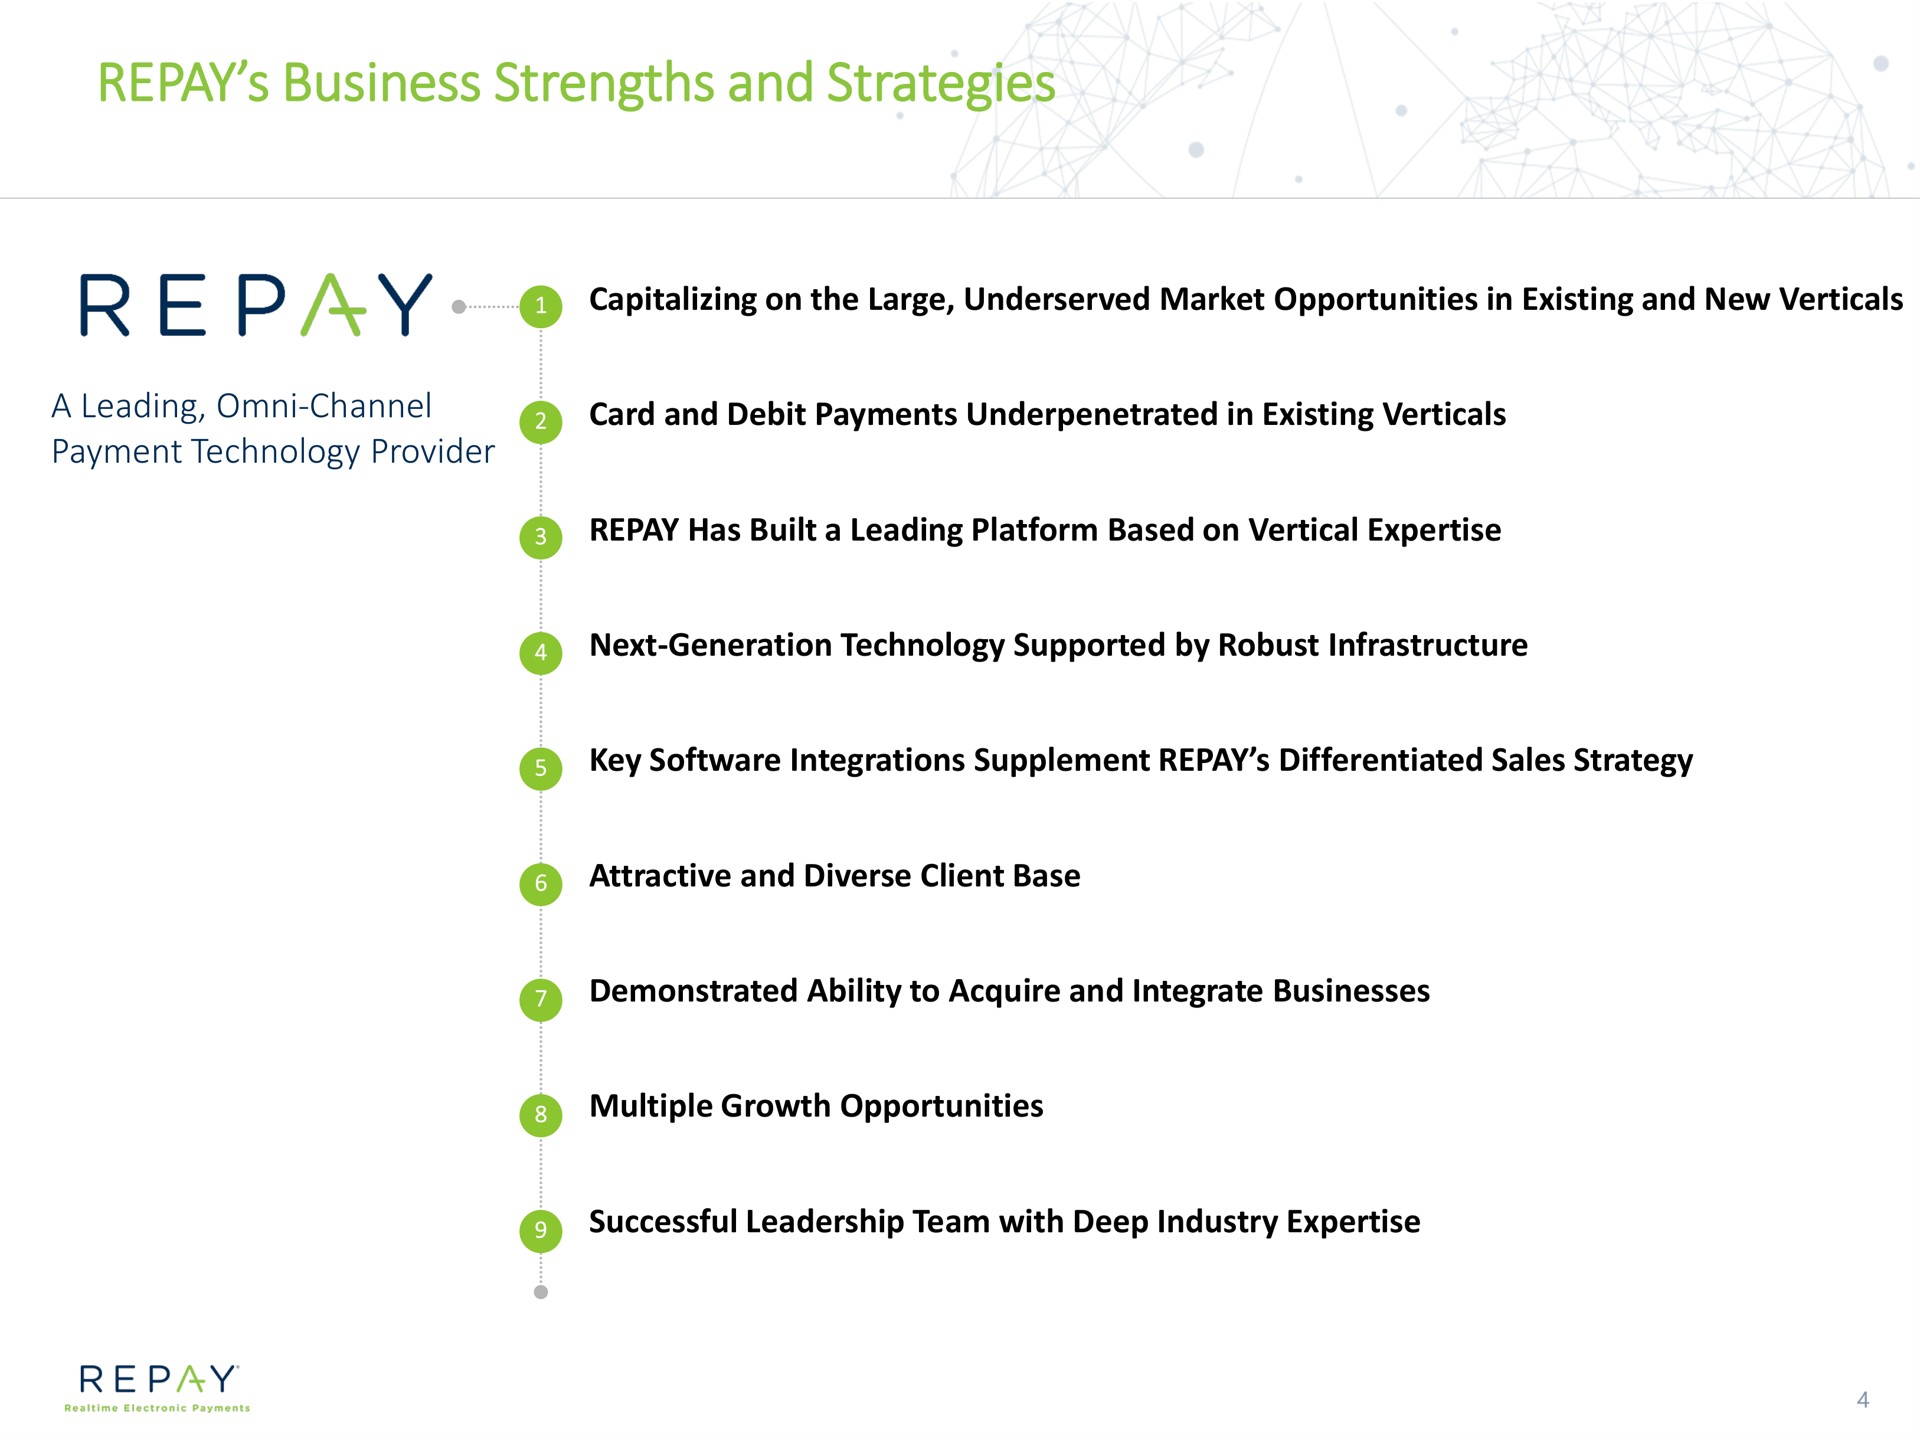 repay business strengths and strategies | Repay